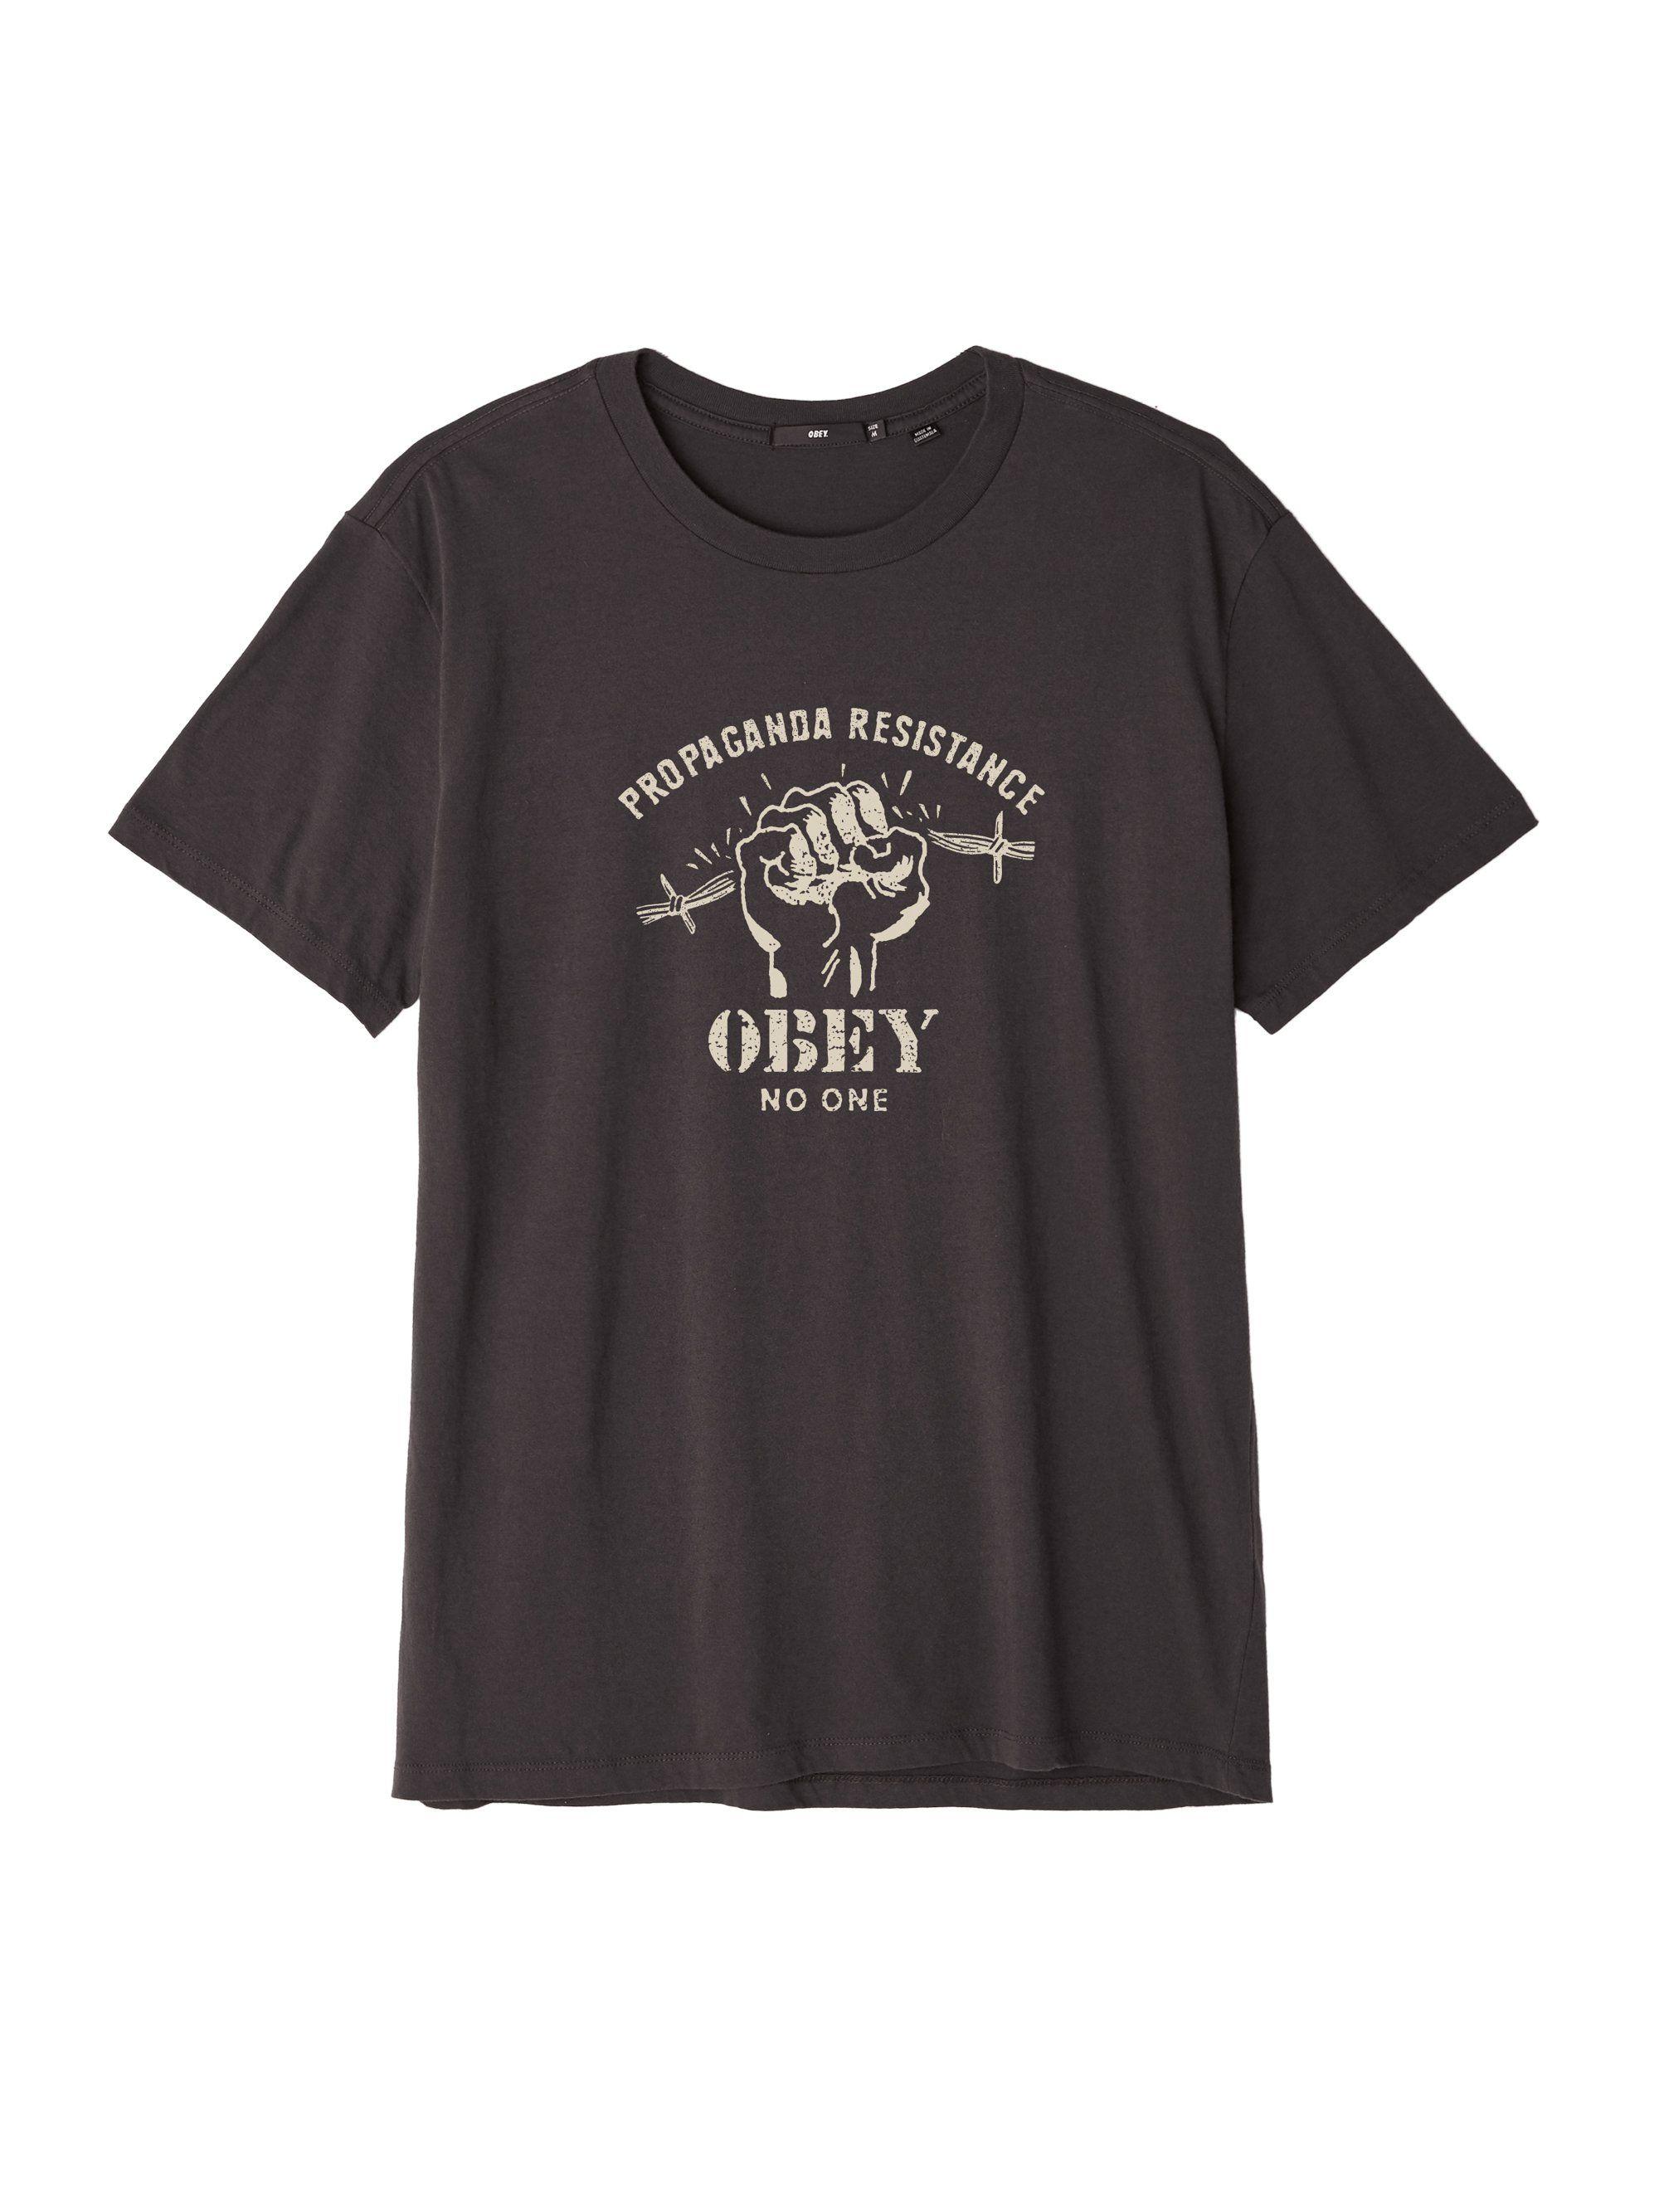 OBEY Clothing Logo - OBEY Resist Fist Superior Tee